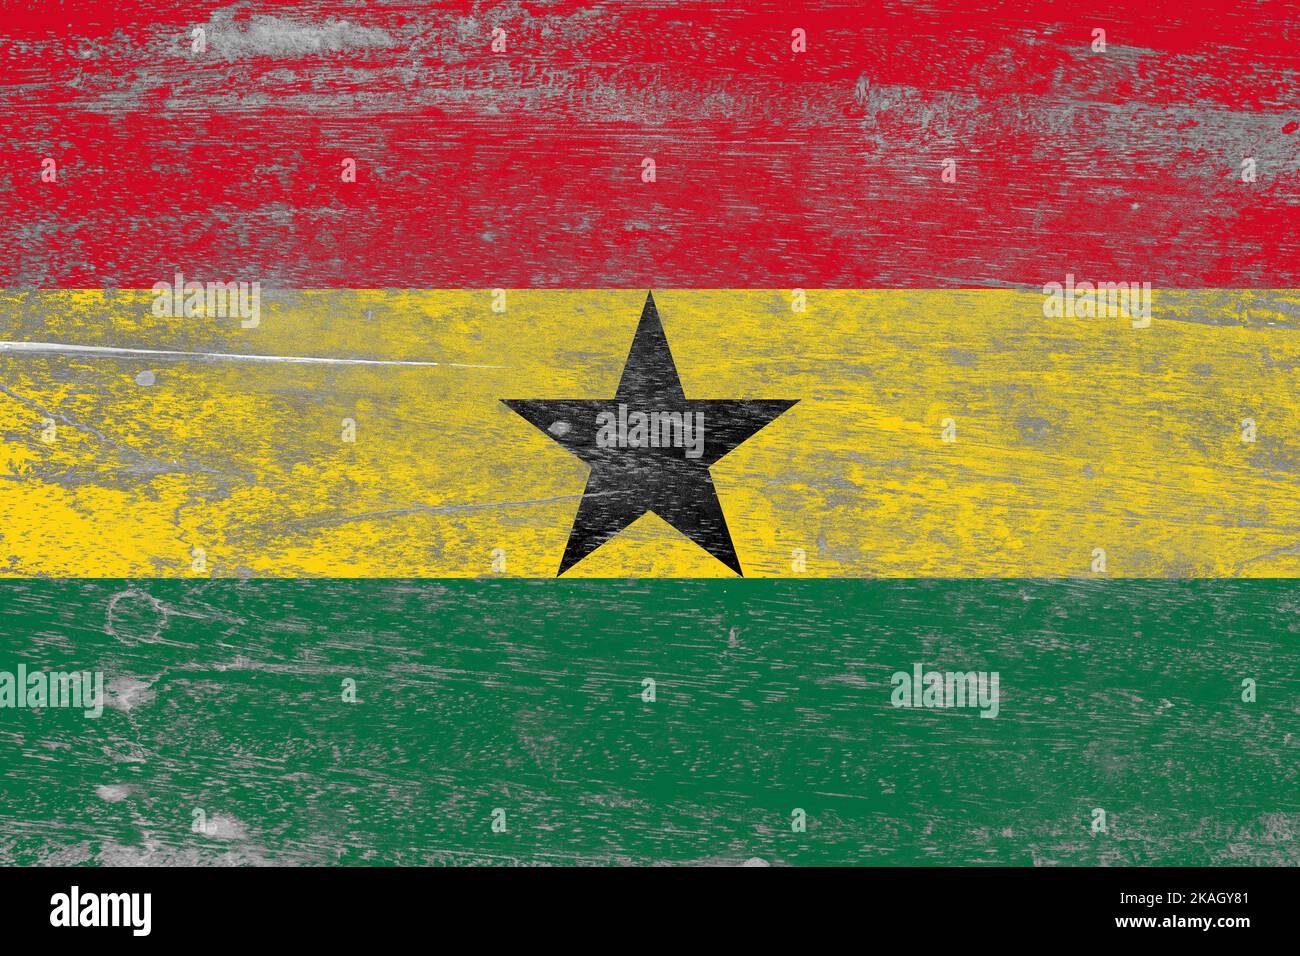 Ghana flag painted on a damaged old wooden background Stock Photo